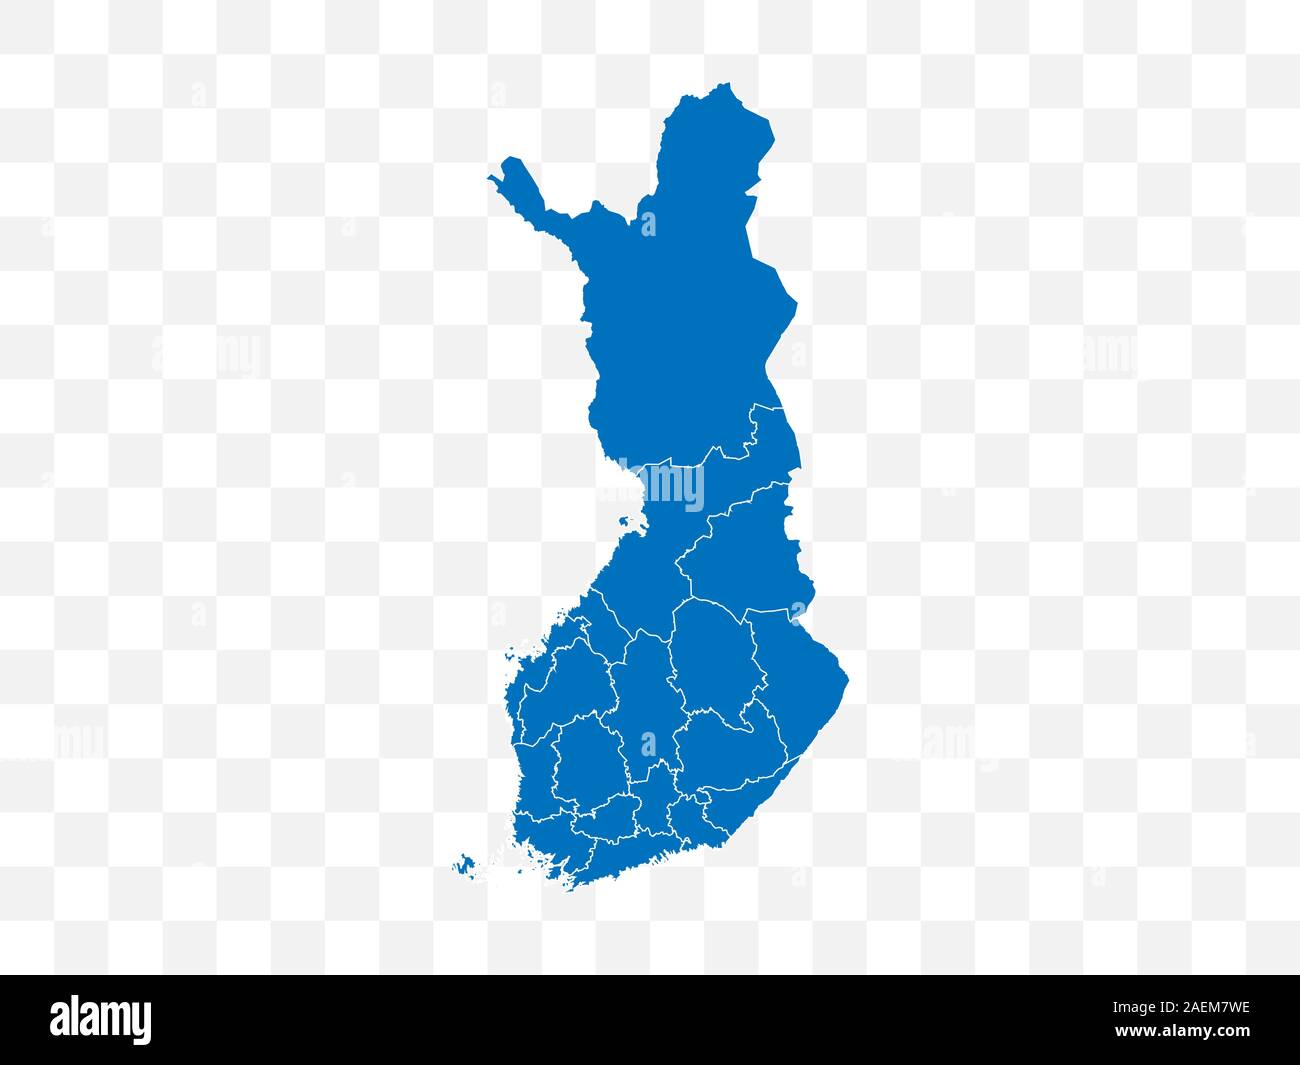 Finland map on transparent background. Vector illustration. Stock Vector